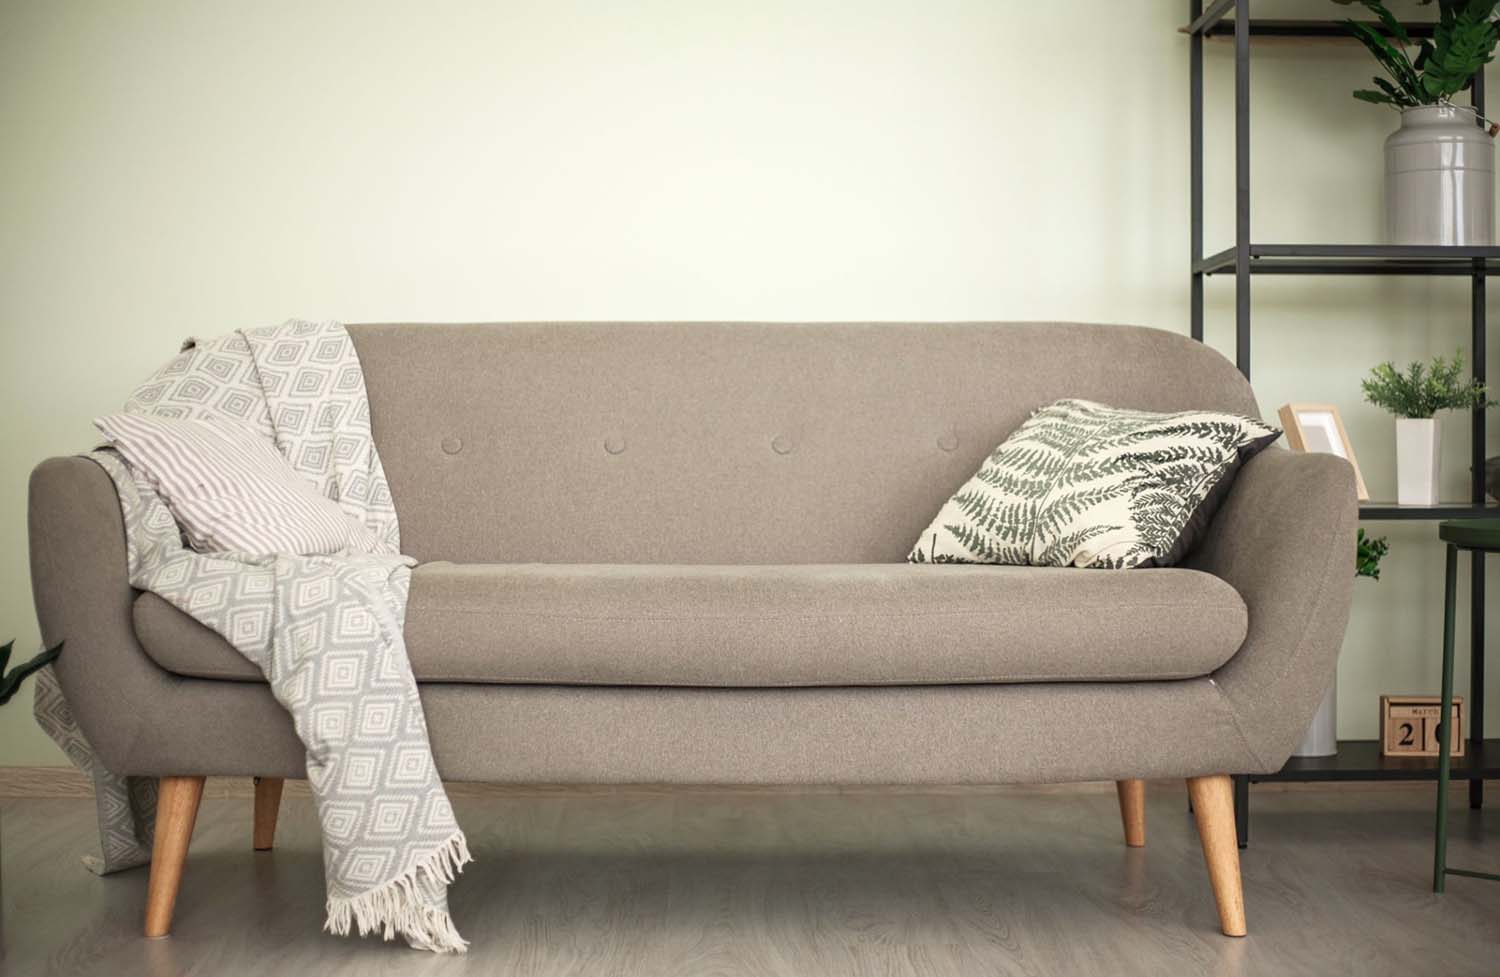 Common Mistakes When Buying Loveseats